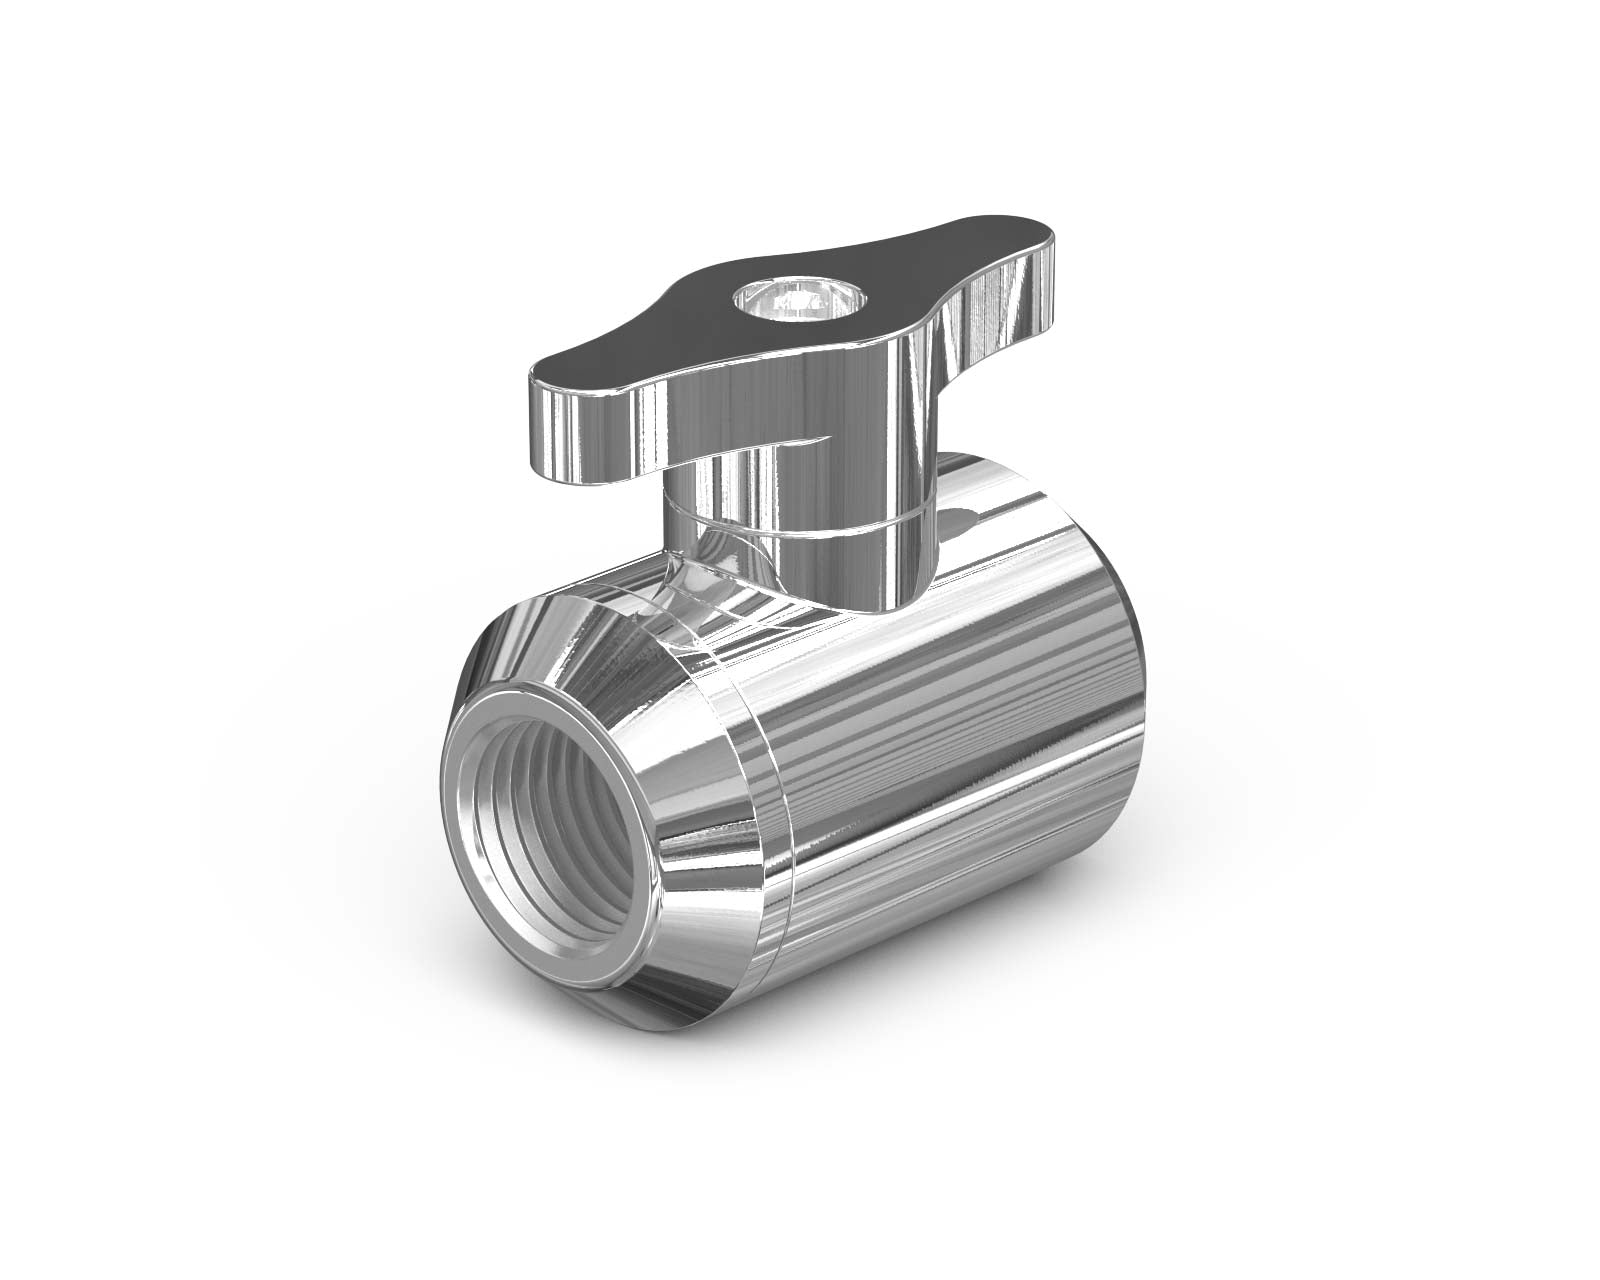 PrimoChill Female to Female G 1/4 Drain Ball Valve - PrimoChill - KEEPING IT COOL Nickel Silver